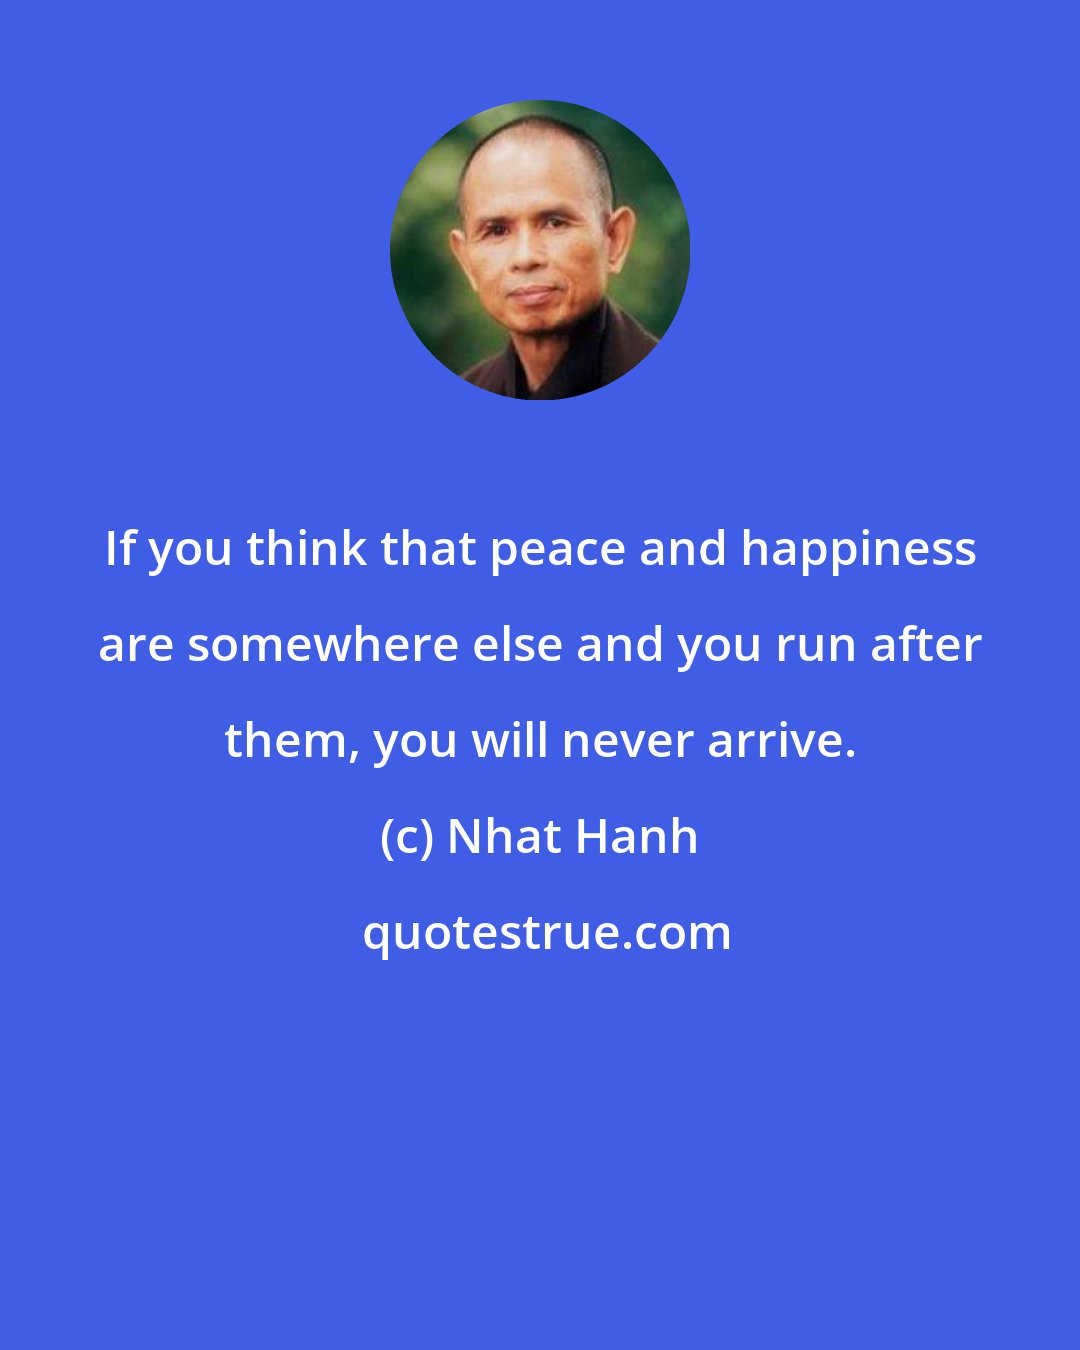 Nhat Hanh: If you think that peace and happiness are somewhere else and you run after them, you will never arrive.